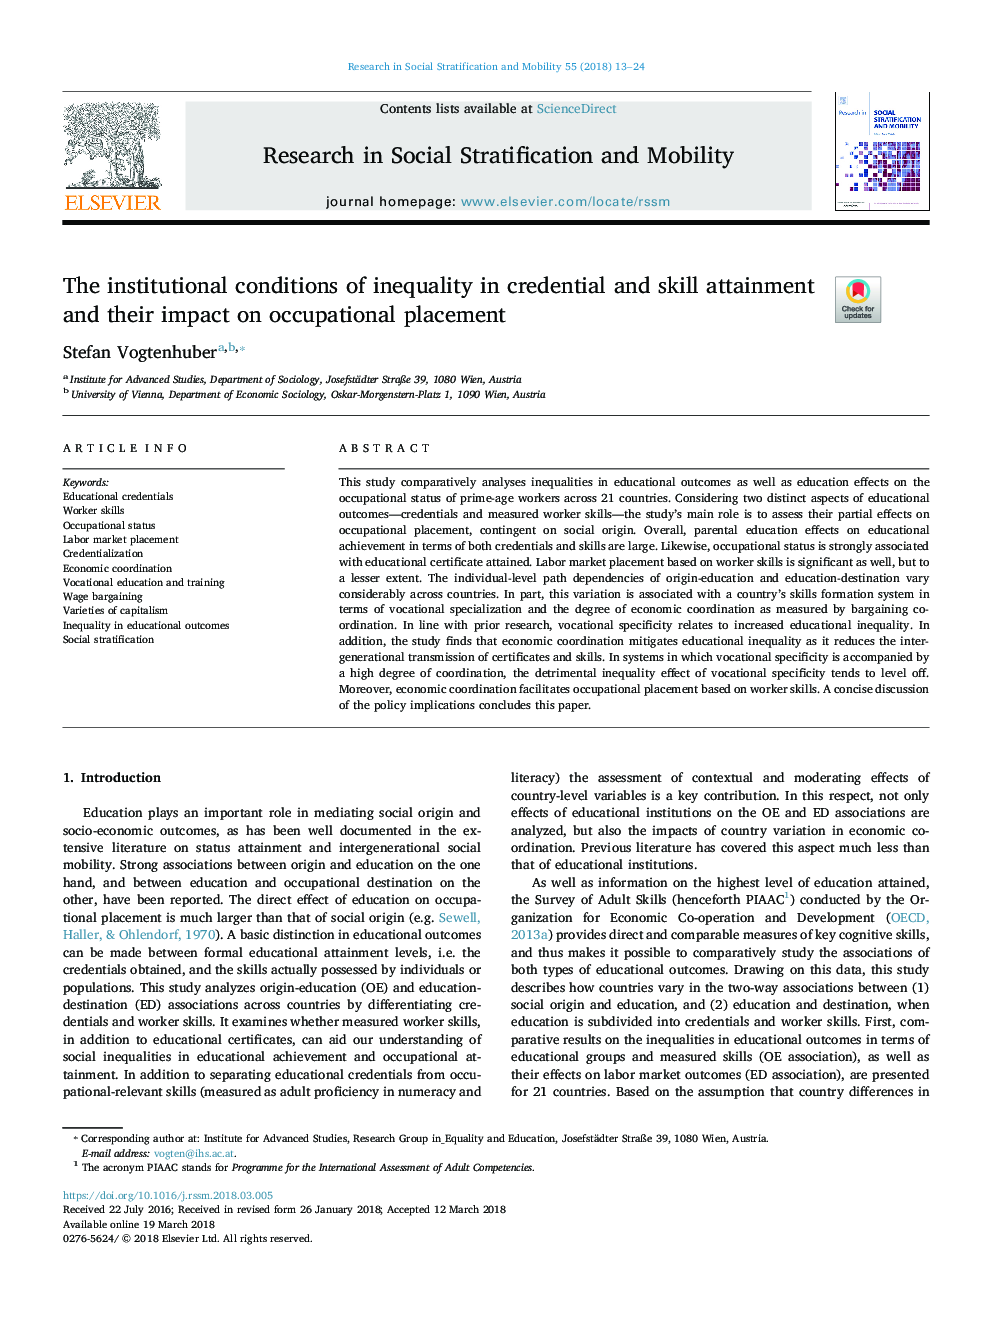 The institutional conditions of inequality in credential and skill attainment and their impact on occupational placement